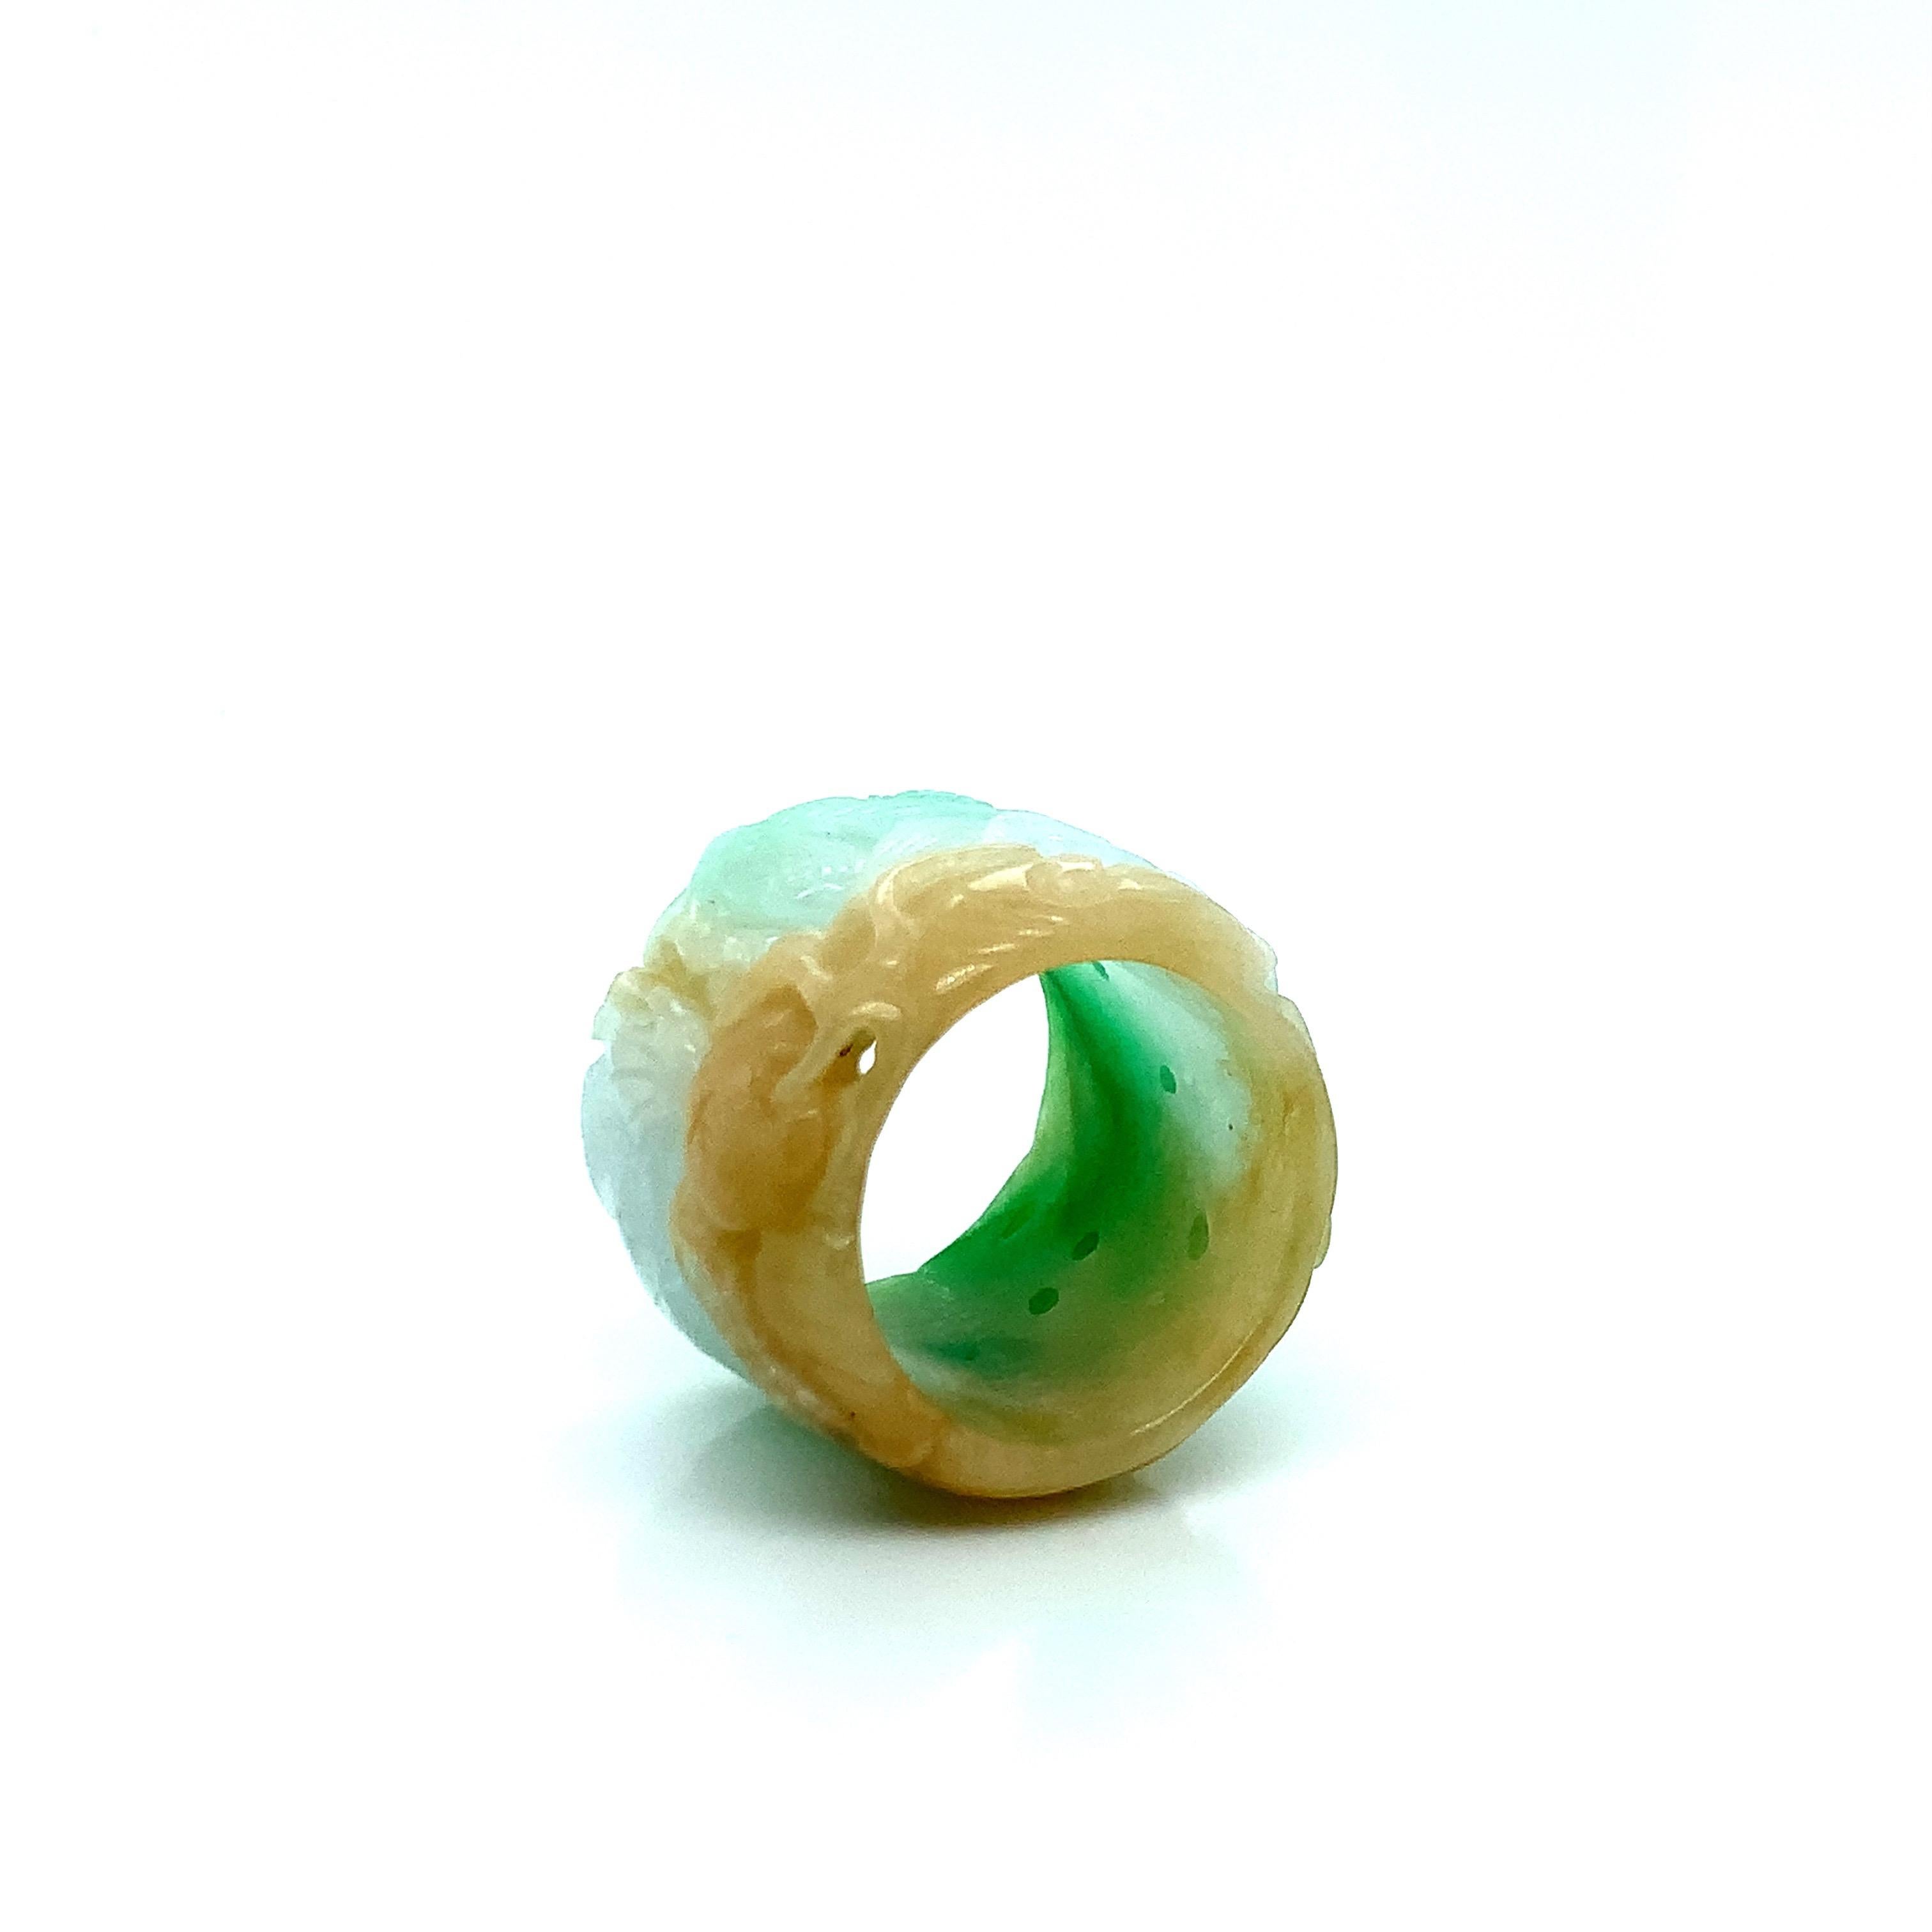 A wide carved jade tri-color archer's ring with a Mason Kay report dated July 27, 2022, stating natural jadeite jade - no indications of dye or impregnation detected. Natural type A jadeite jade. Total weight: 15.0 grams. Size 9.5.